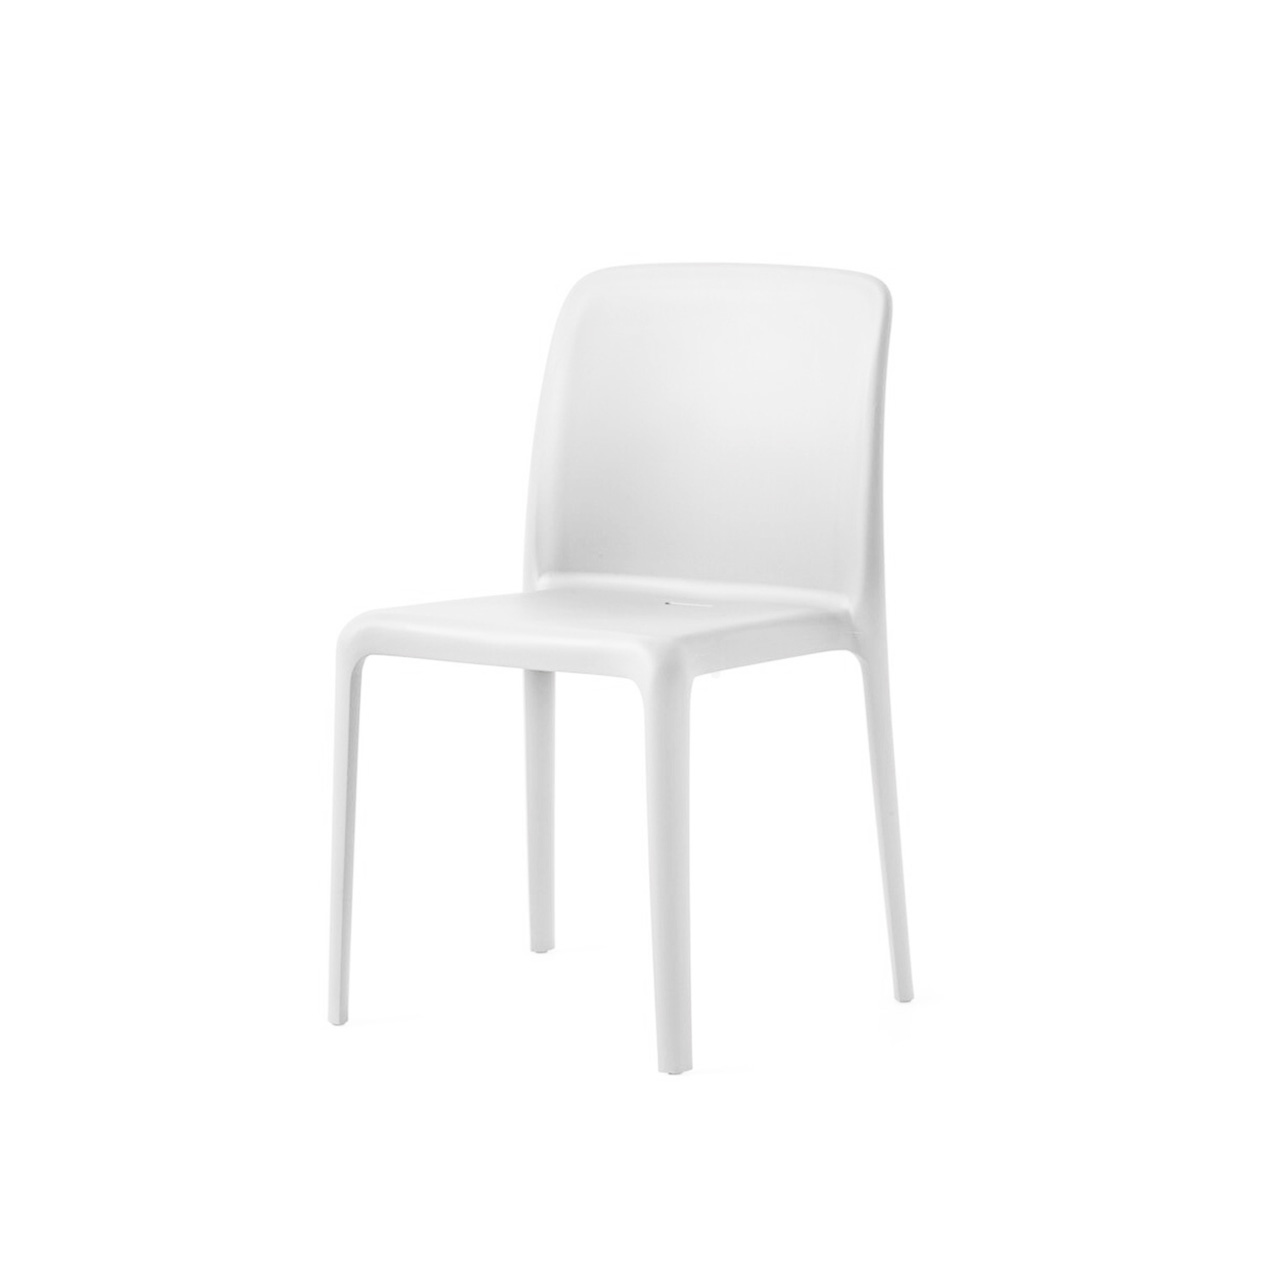 CONNUBIA BY CALLIGARISBAYO CHAIR 바요 체어 (화이트)MADE IN ITALY